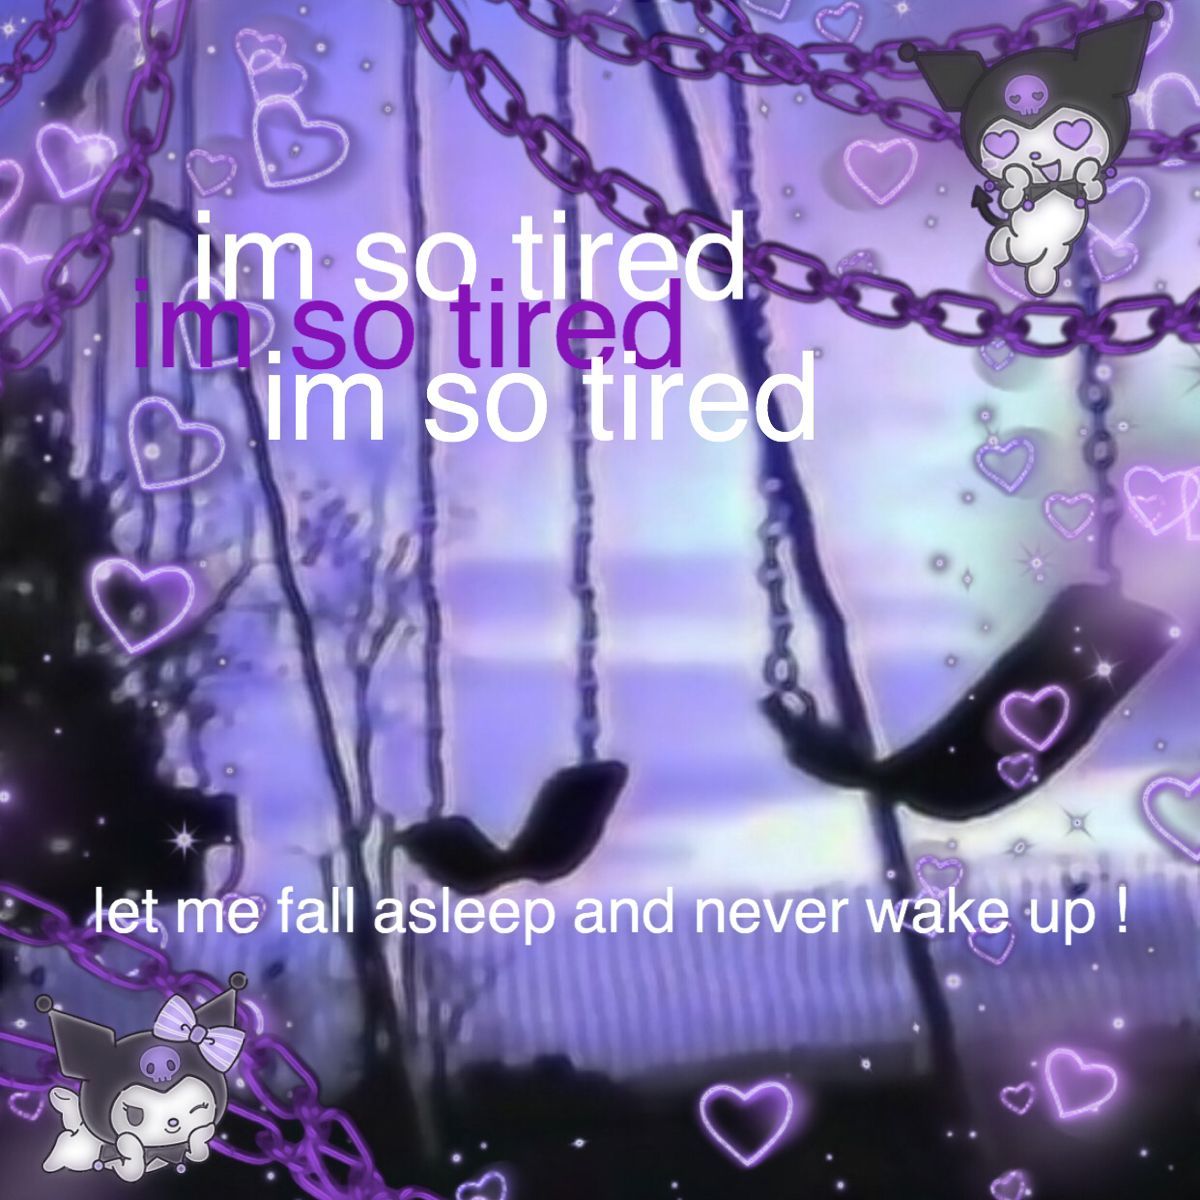 A purple and black aesthetic image with the text 